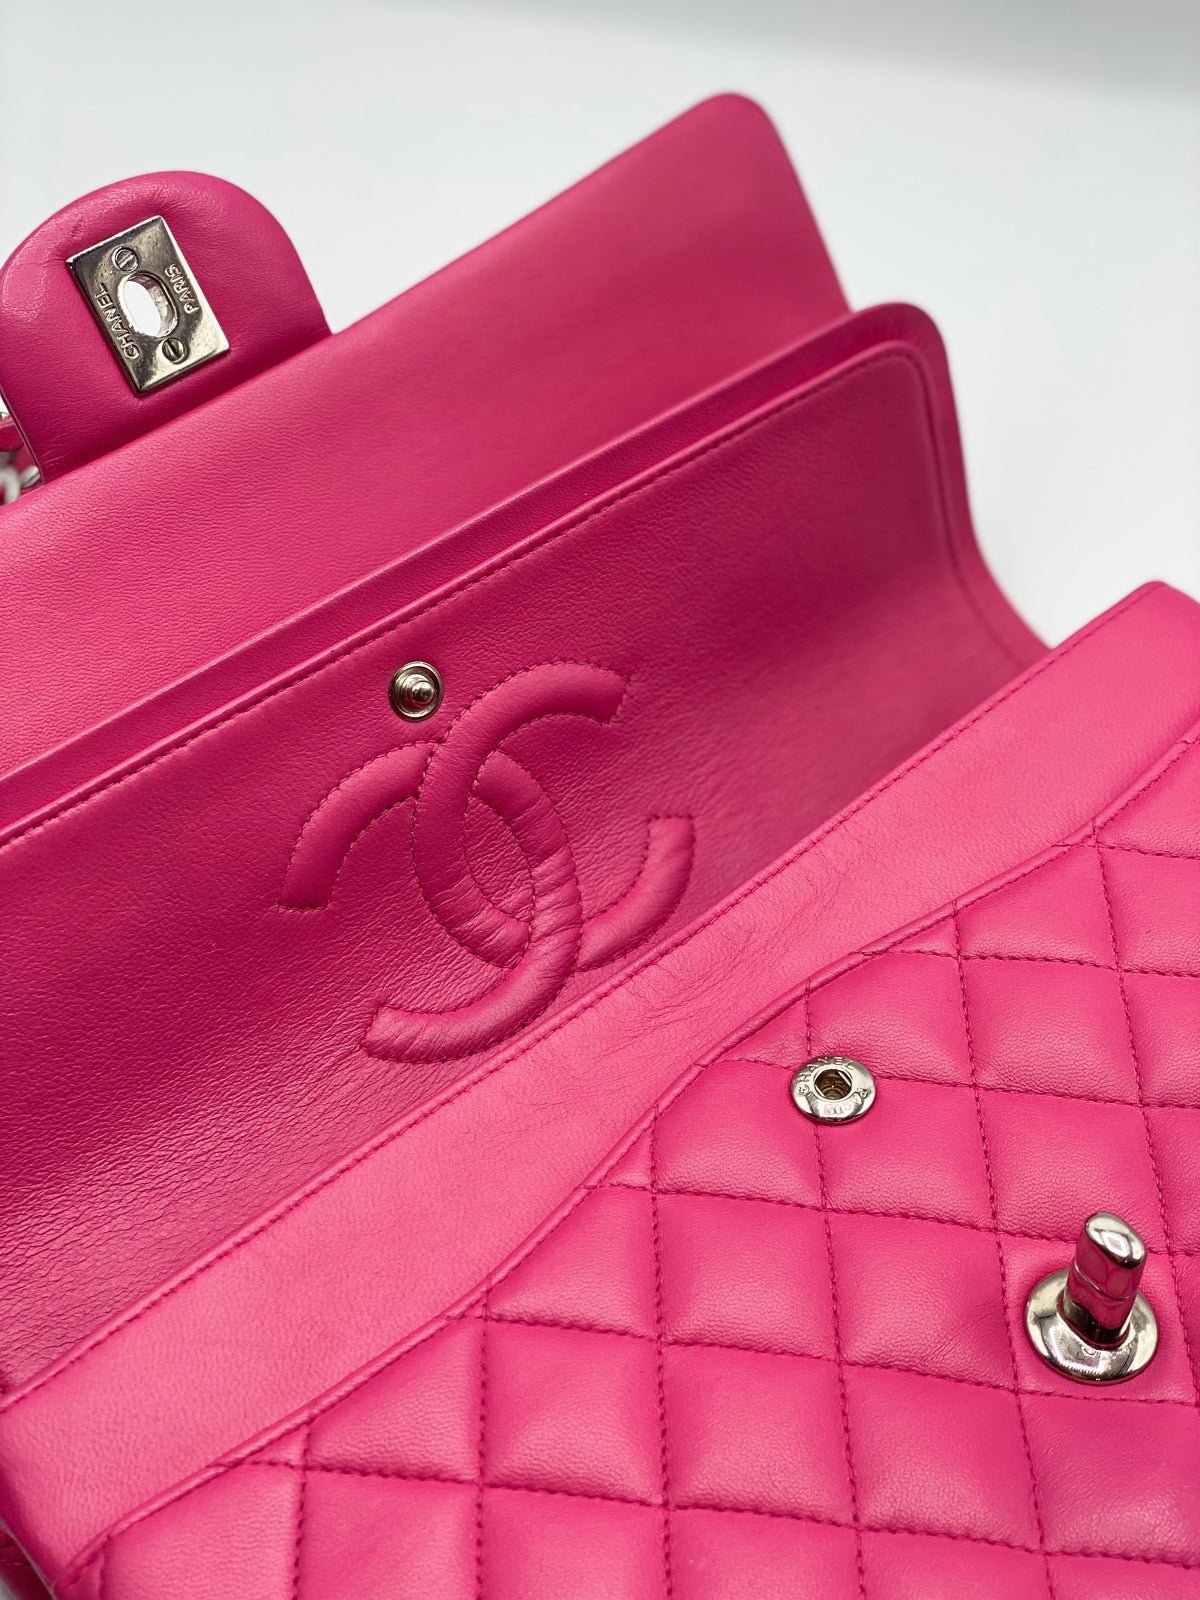 CHANEL| Classic Medium Double Flap in Pink Lambskin Leather